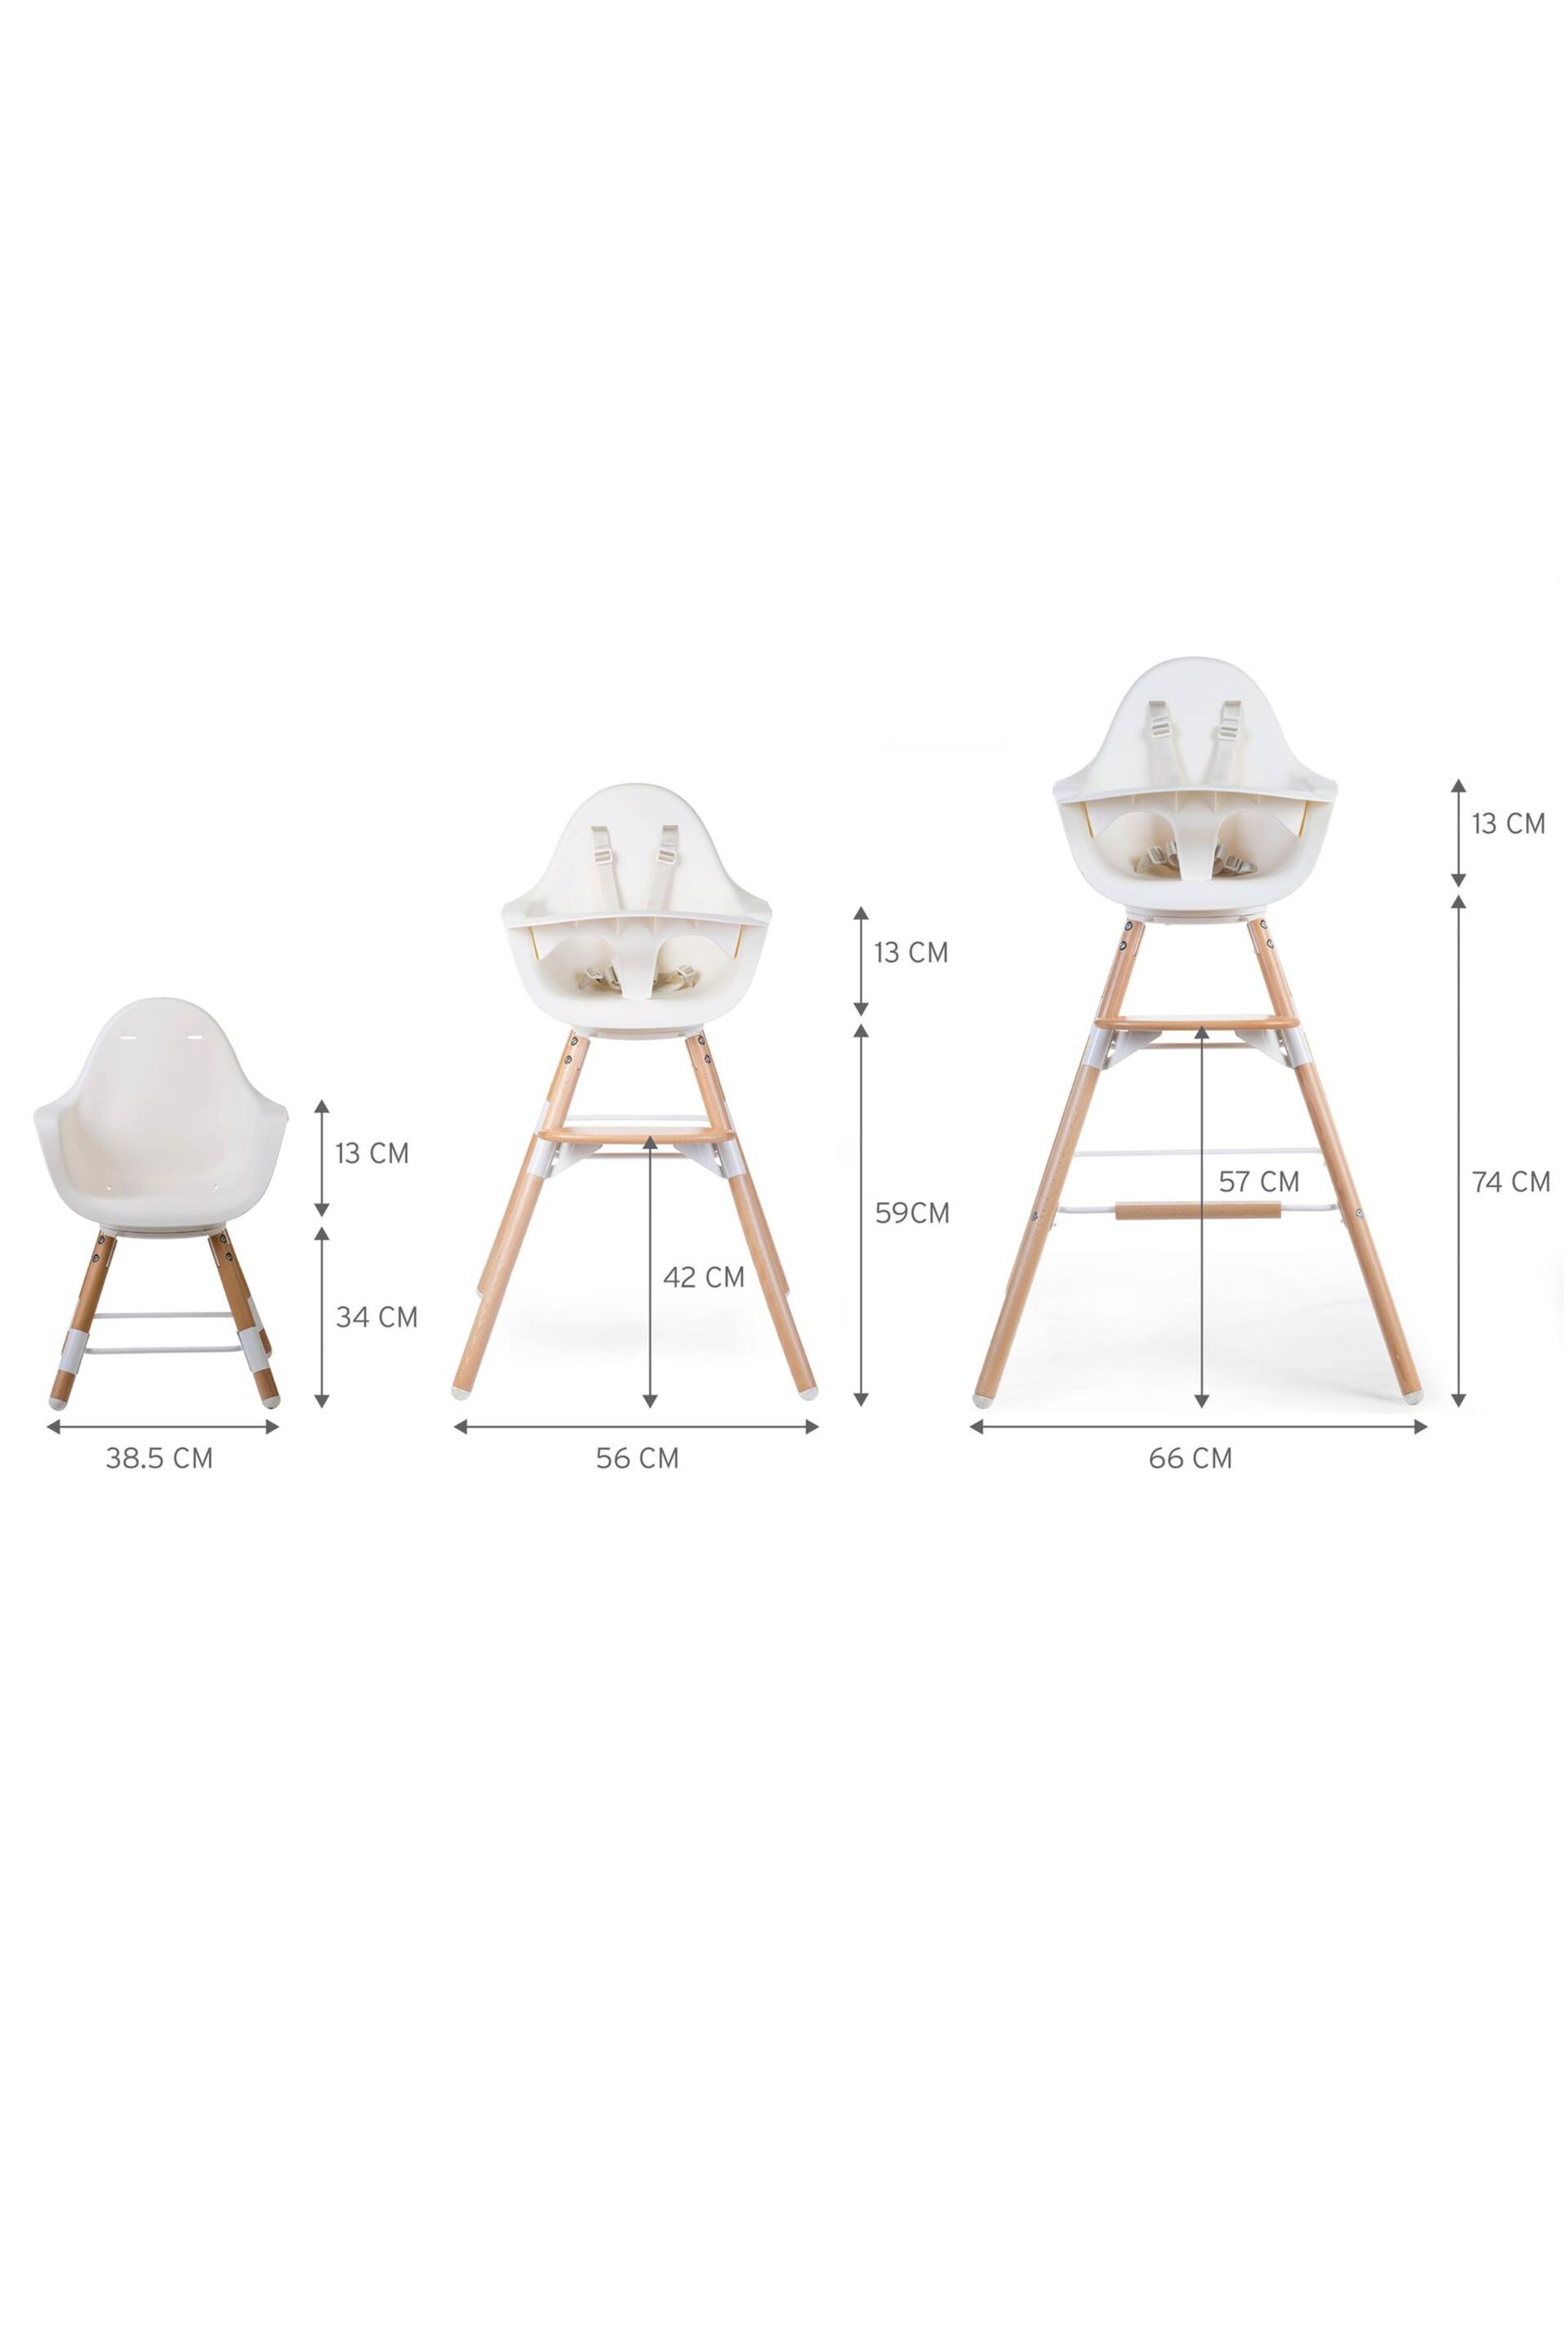 Childhome White Evolu One 80° High Chair White - Image 10 of 10